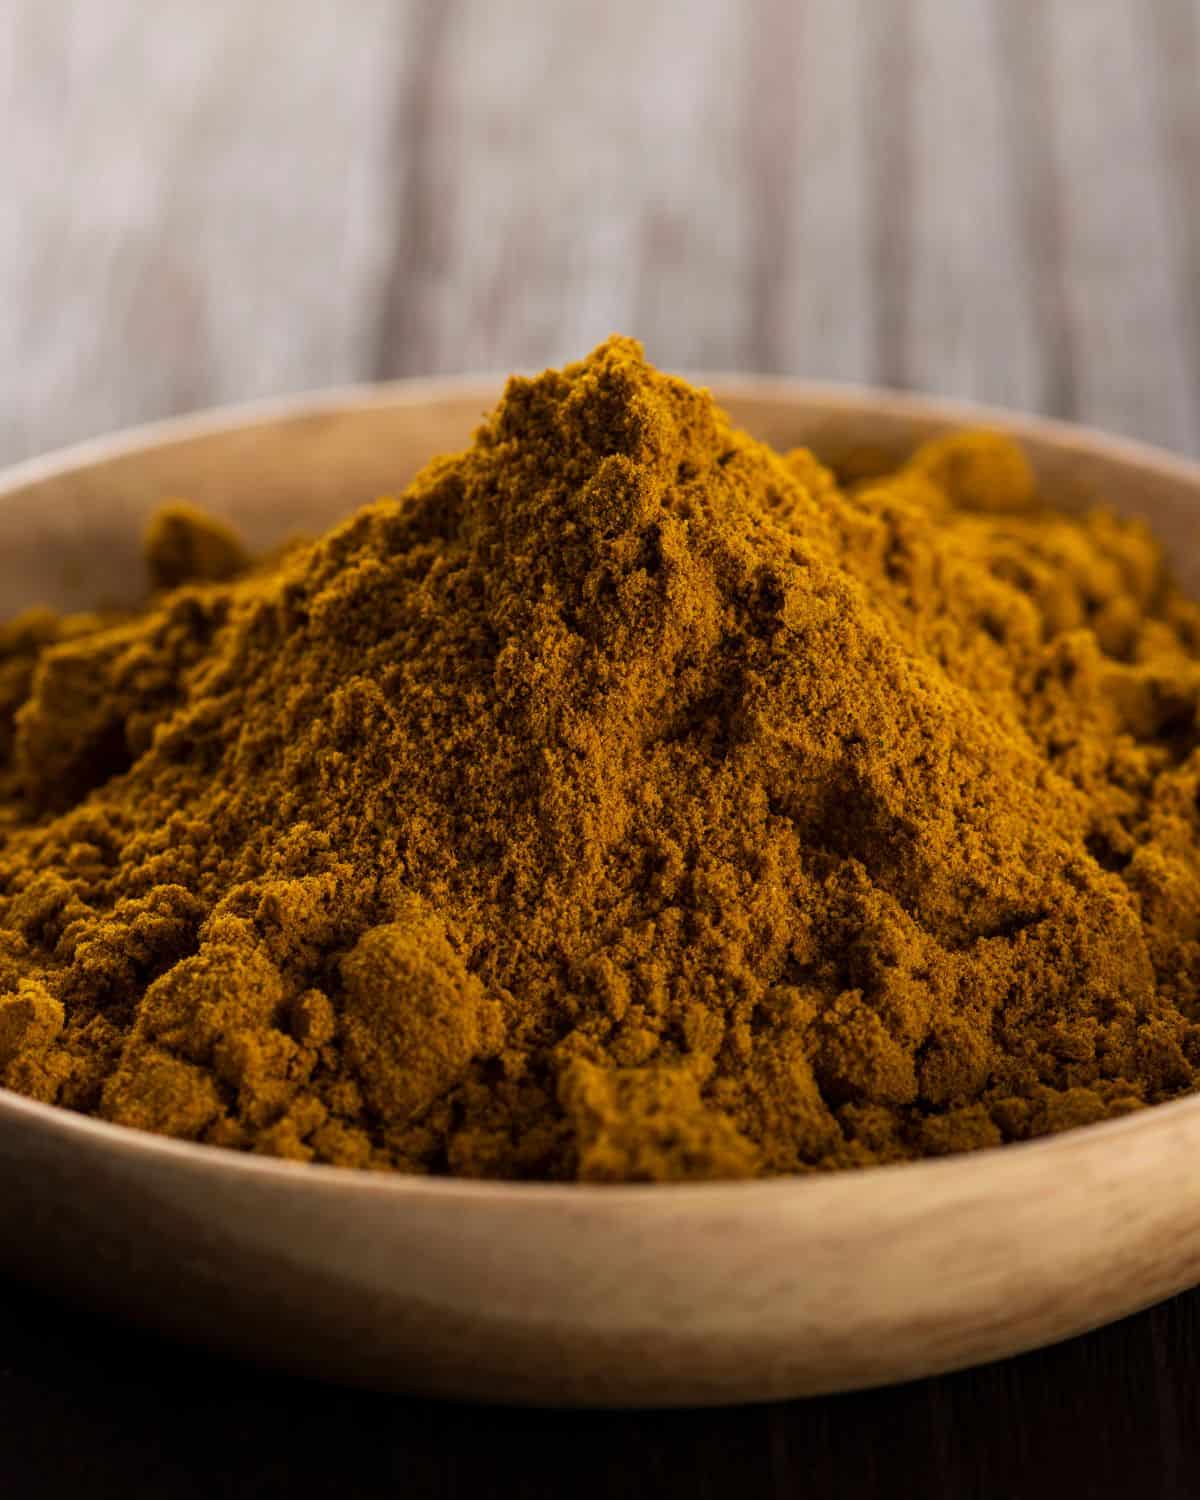 Curry powder in a wooden bowl.